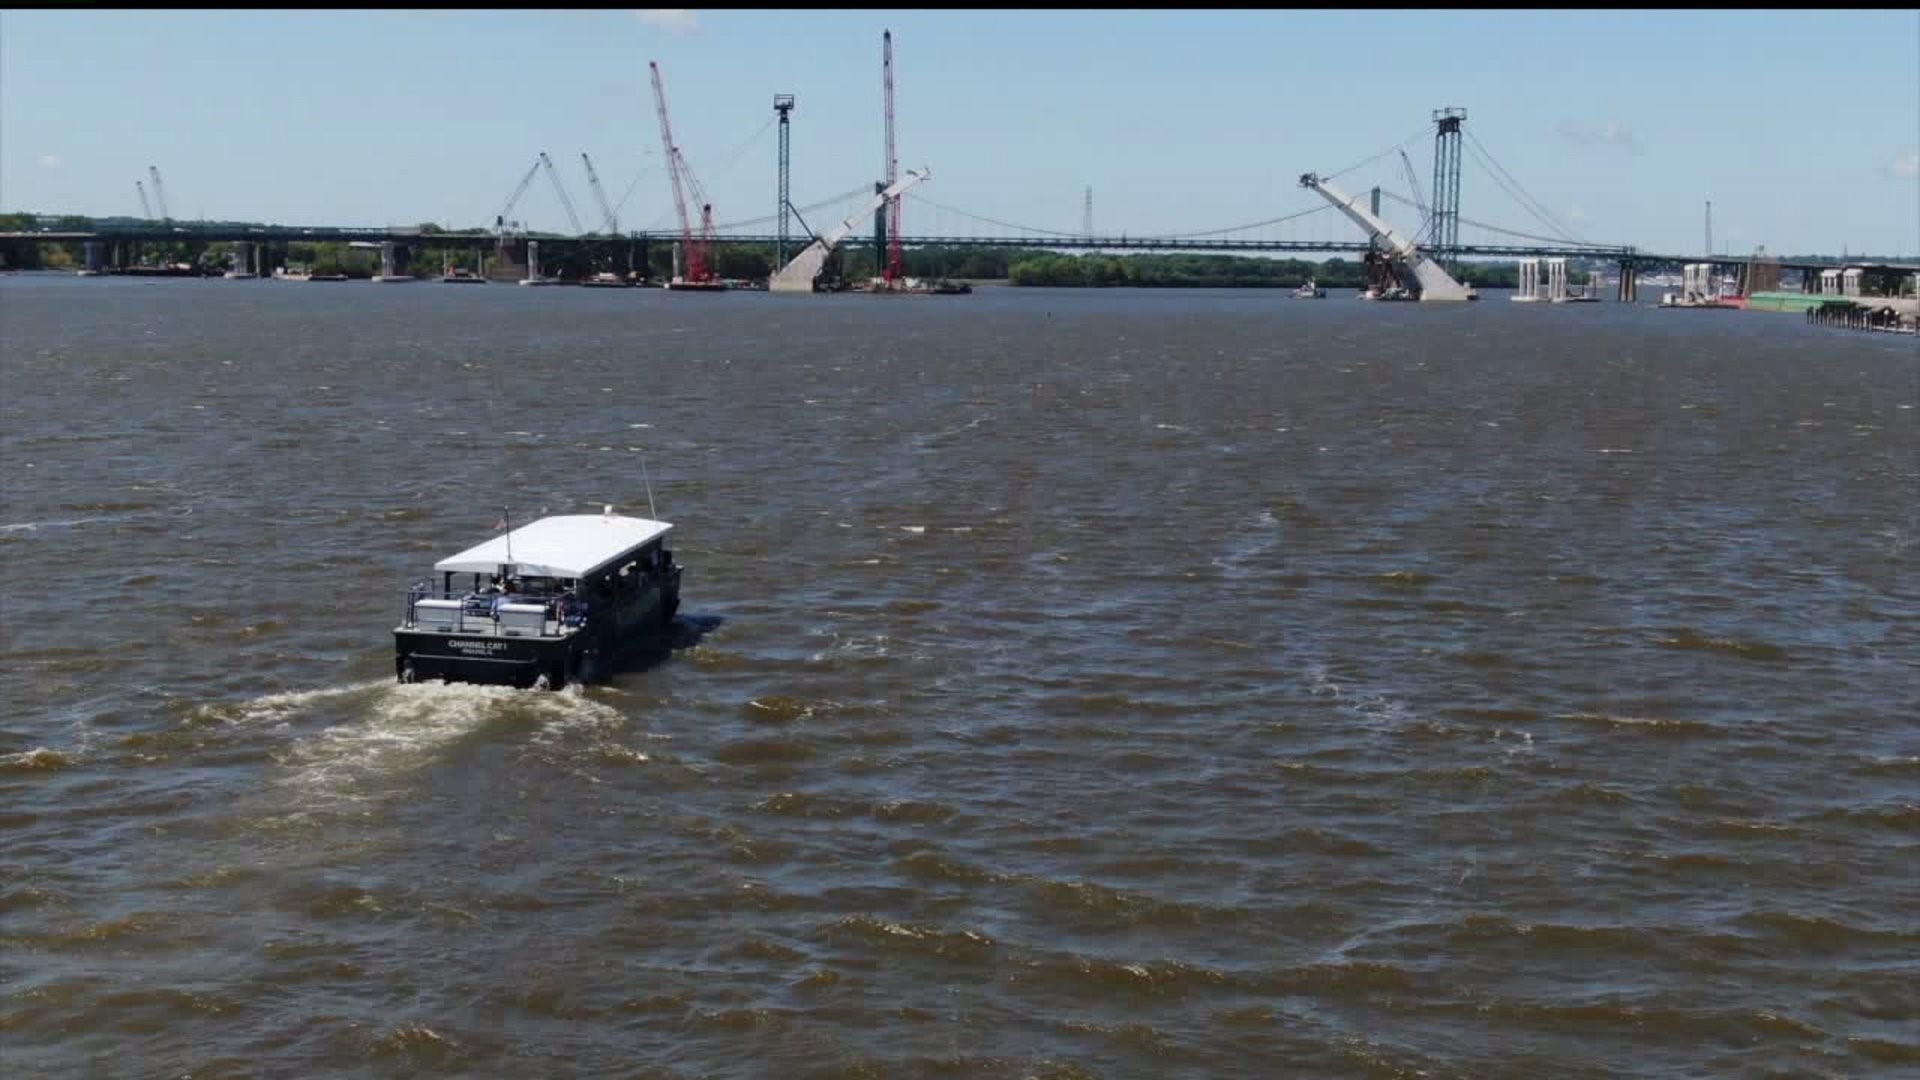 Channel Cat river taxi hours to change after Labor Day Weekend